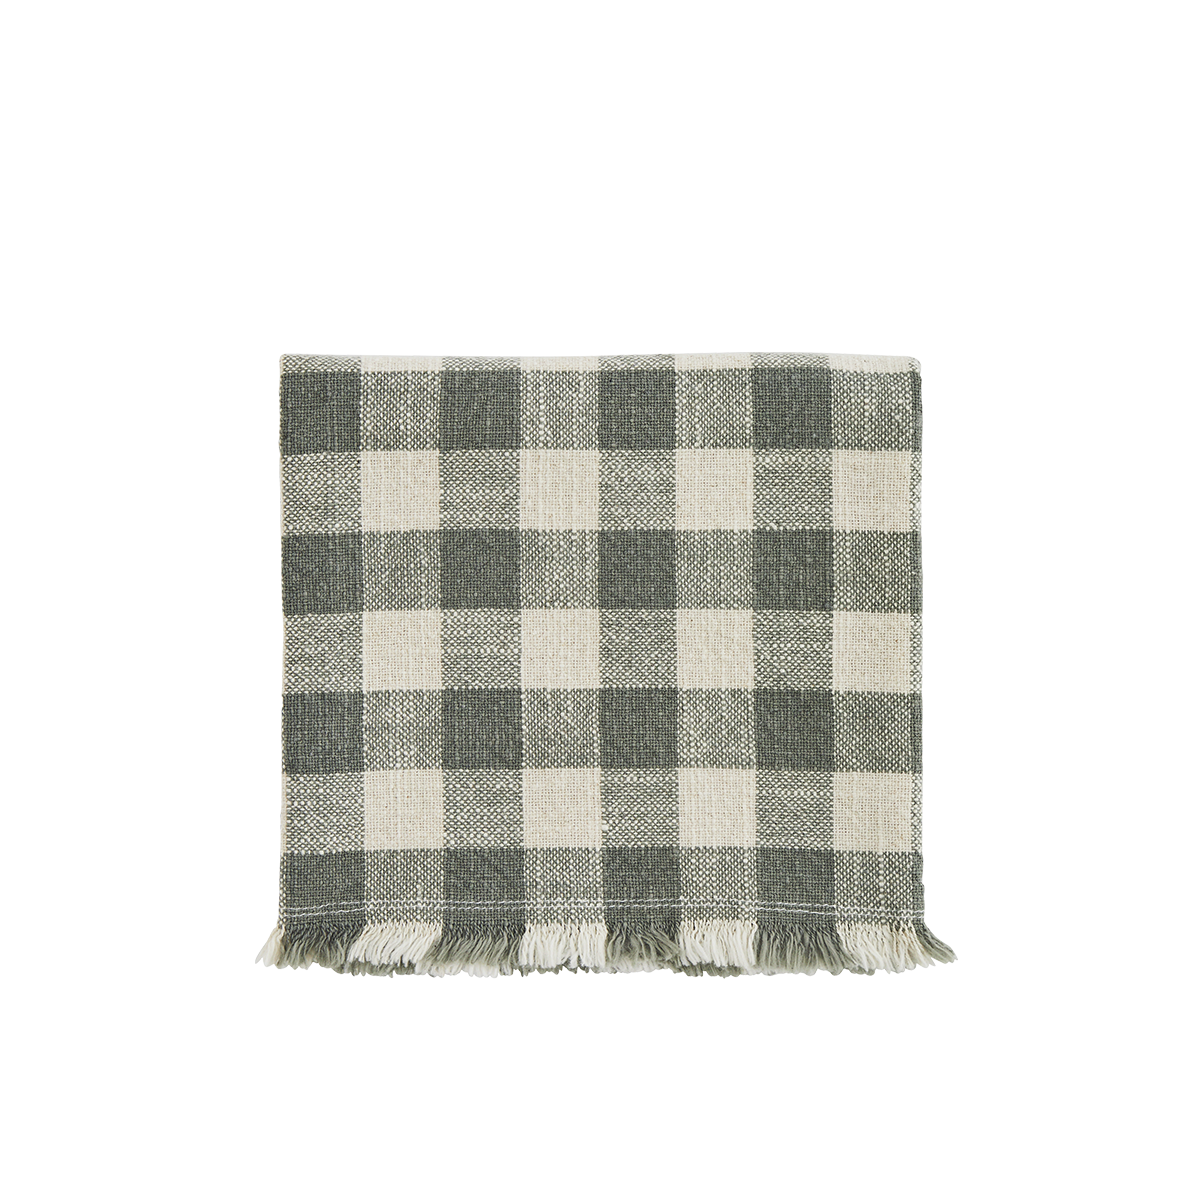 Checked kitchen towel w/ fringes